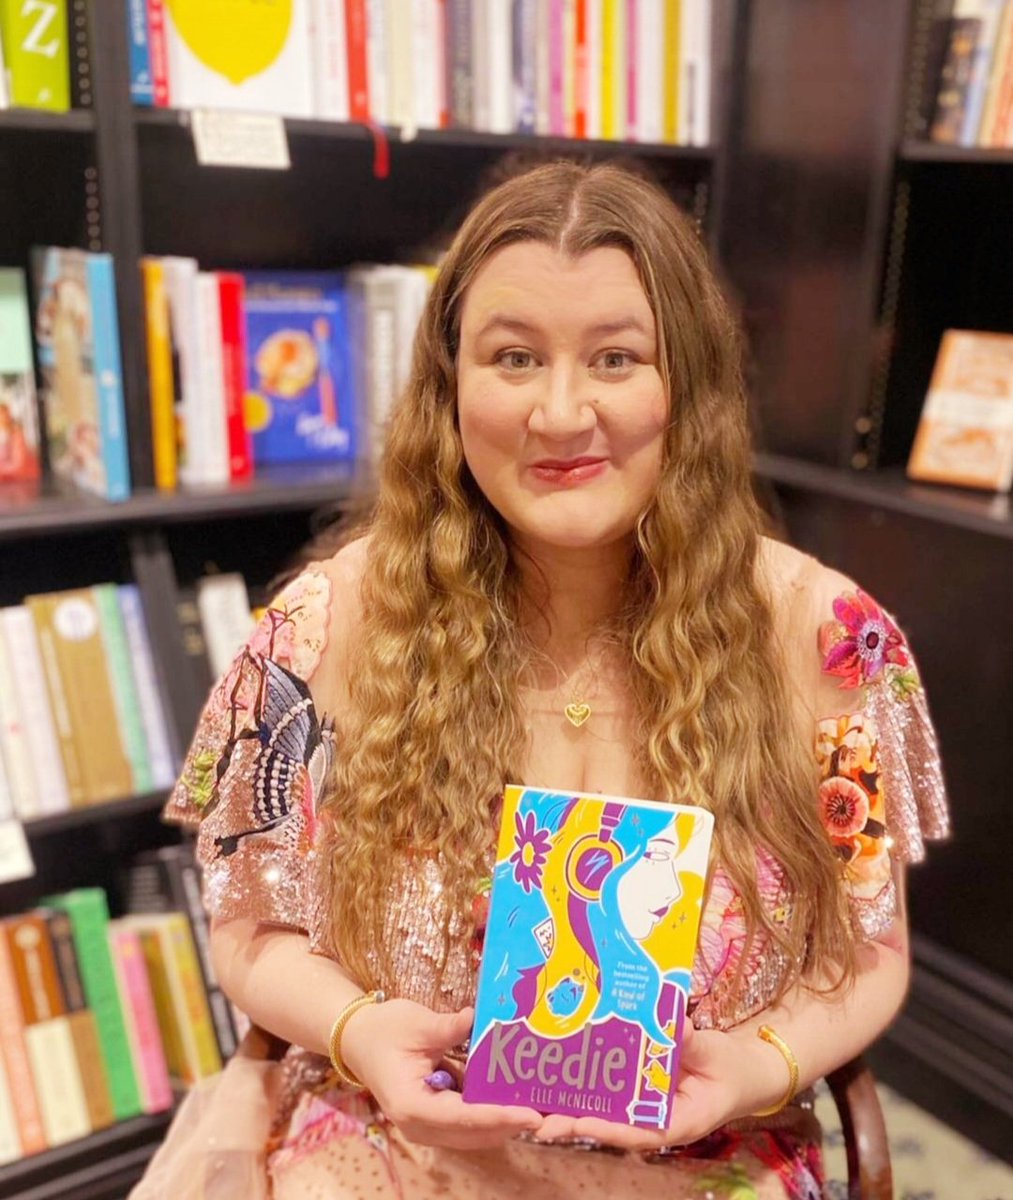 going live with the Autistic Girls Network at 8pm tonight. then some recordings tomorrow and hopefully a visit to Waterstones Kensington and Chiswick. then the Scottish leg of the tour starts on Thursday! personalised copies of KEEDIE available via @PortyBooks